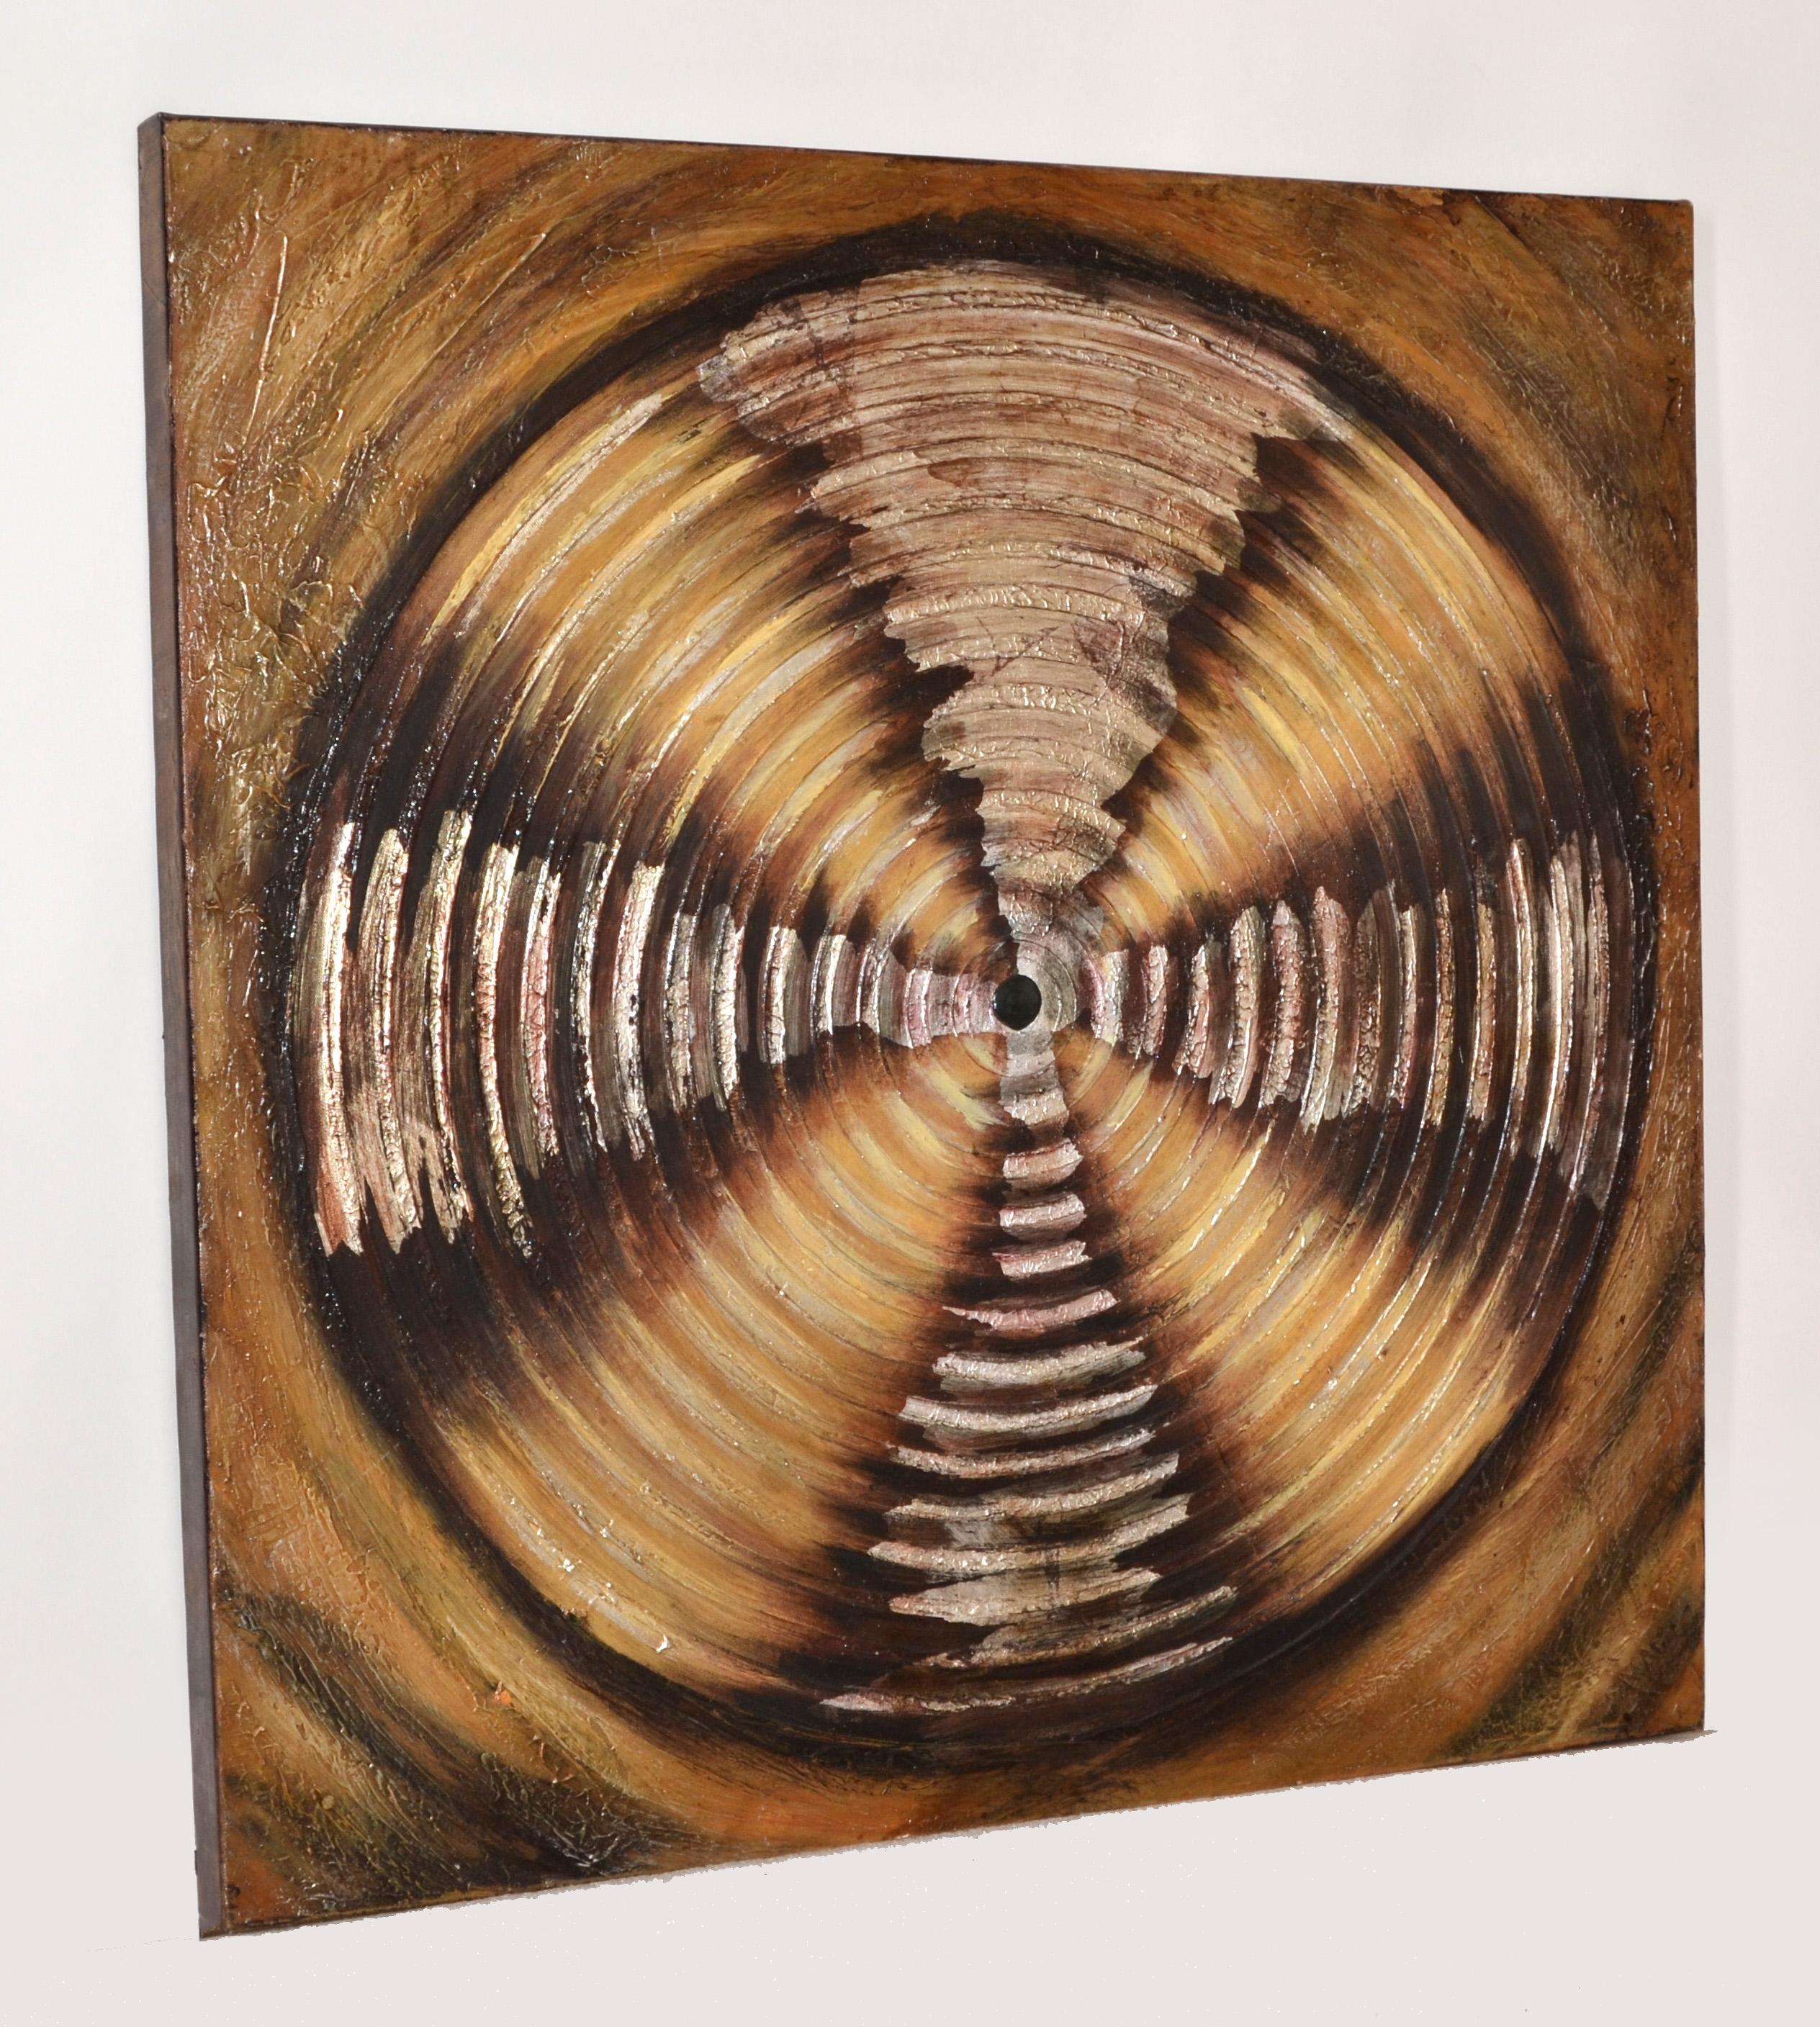 Are You ready to decorate Your Home and looking for a new Painting.
For Sale I offer this abstract piece of Fine Art in Silver, Gold, Bronze and Black Colors.
Different Brushwork and Techniques make it look like 3D or a fan in movement, stunner